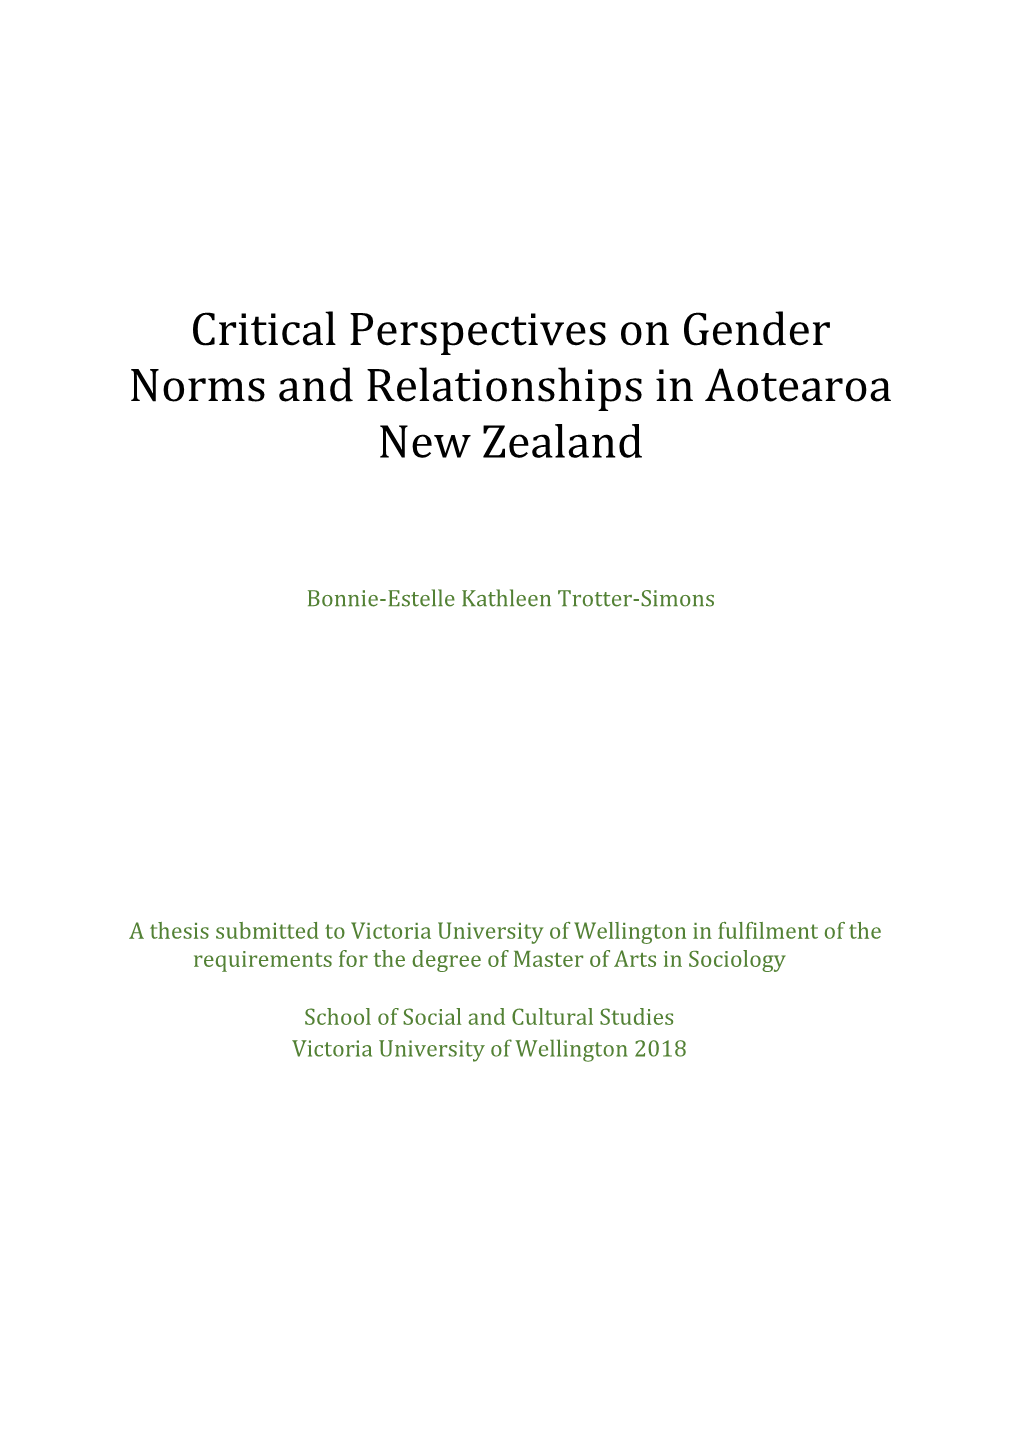 Critical Perspectives on Gender Norms and Relationships in Aotearoa New Zealand